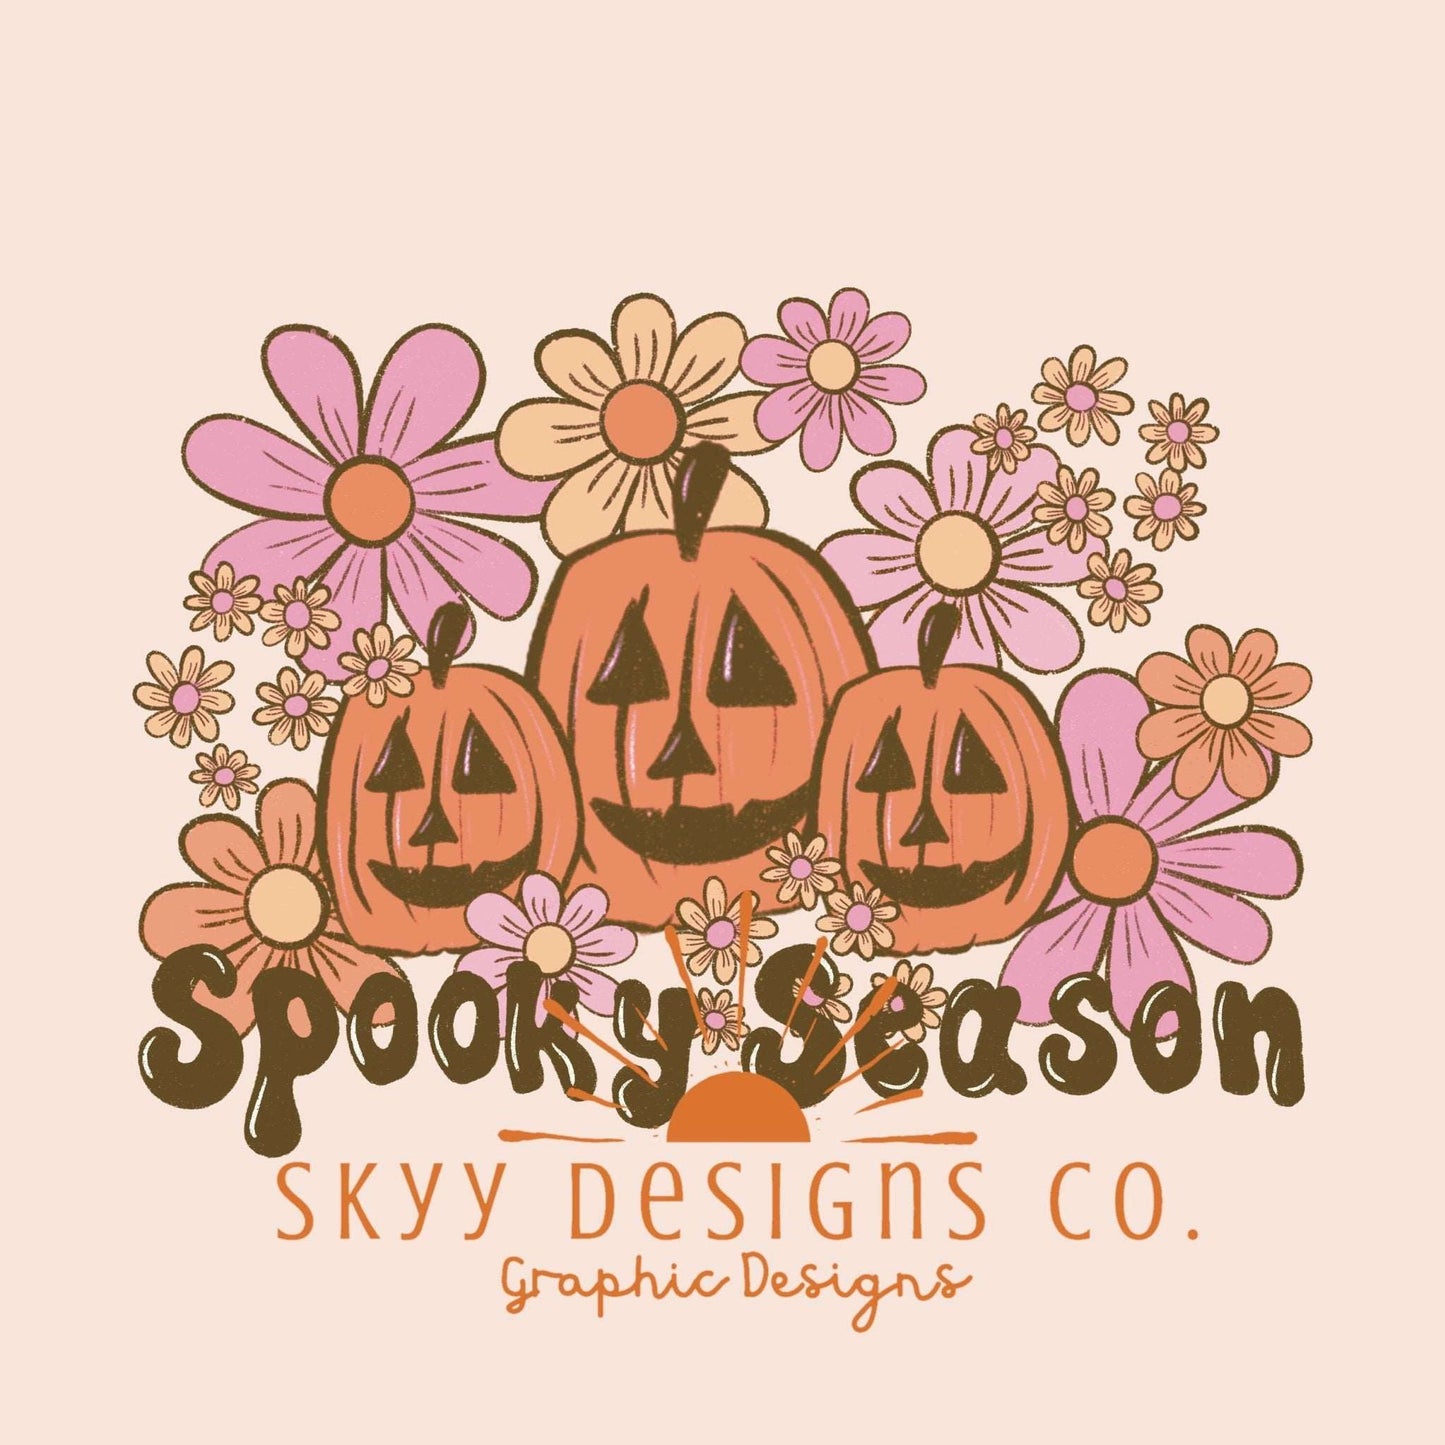 Halloween Png design, fall Png file, Halloween Png lettering for shirt, Spooky season Png, Png design file download - SkyyDesignsCo